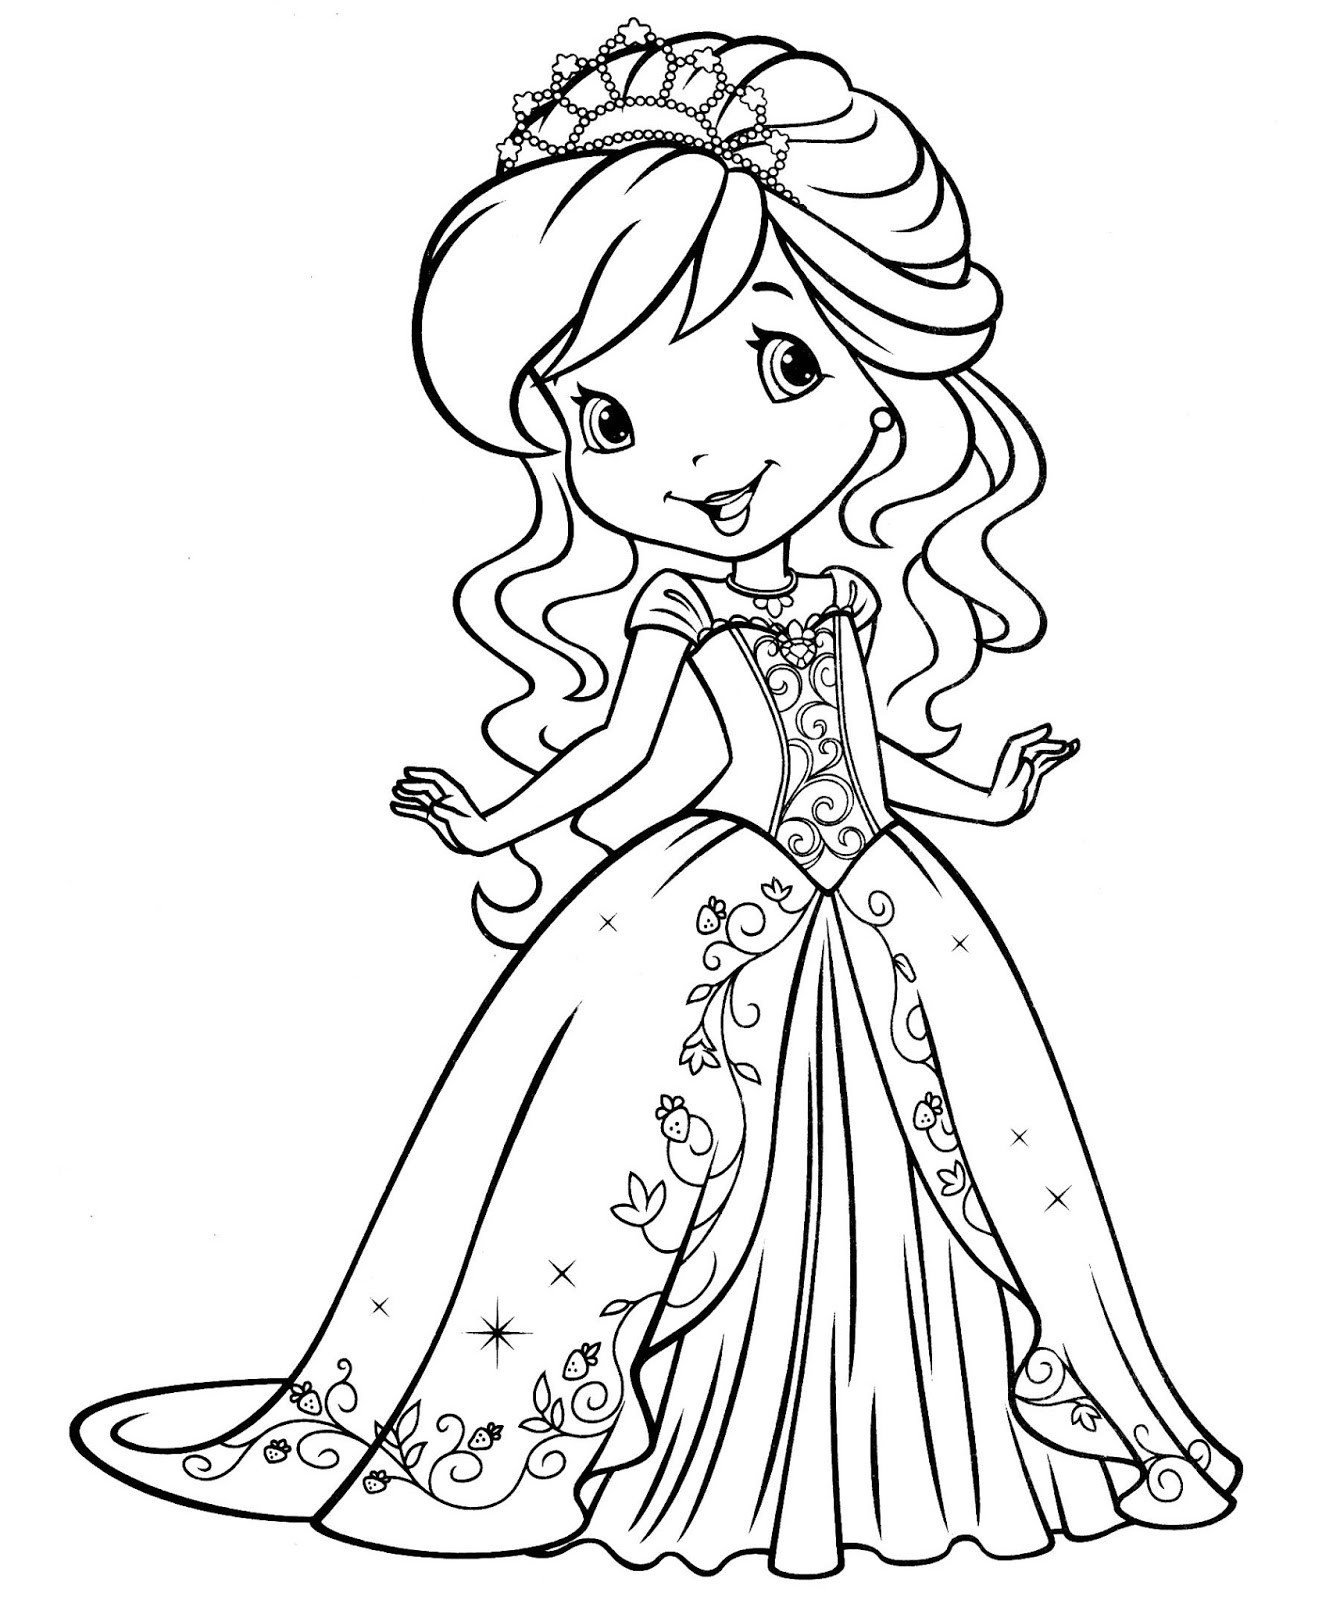 Coloring Pages For Girls Cute
 Coloring Pages for Girls Best Coloring Pages For Kids